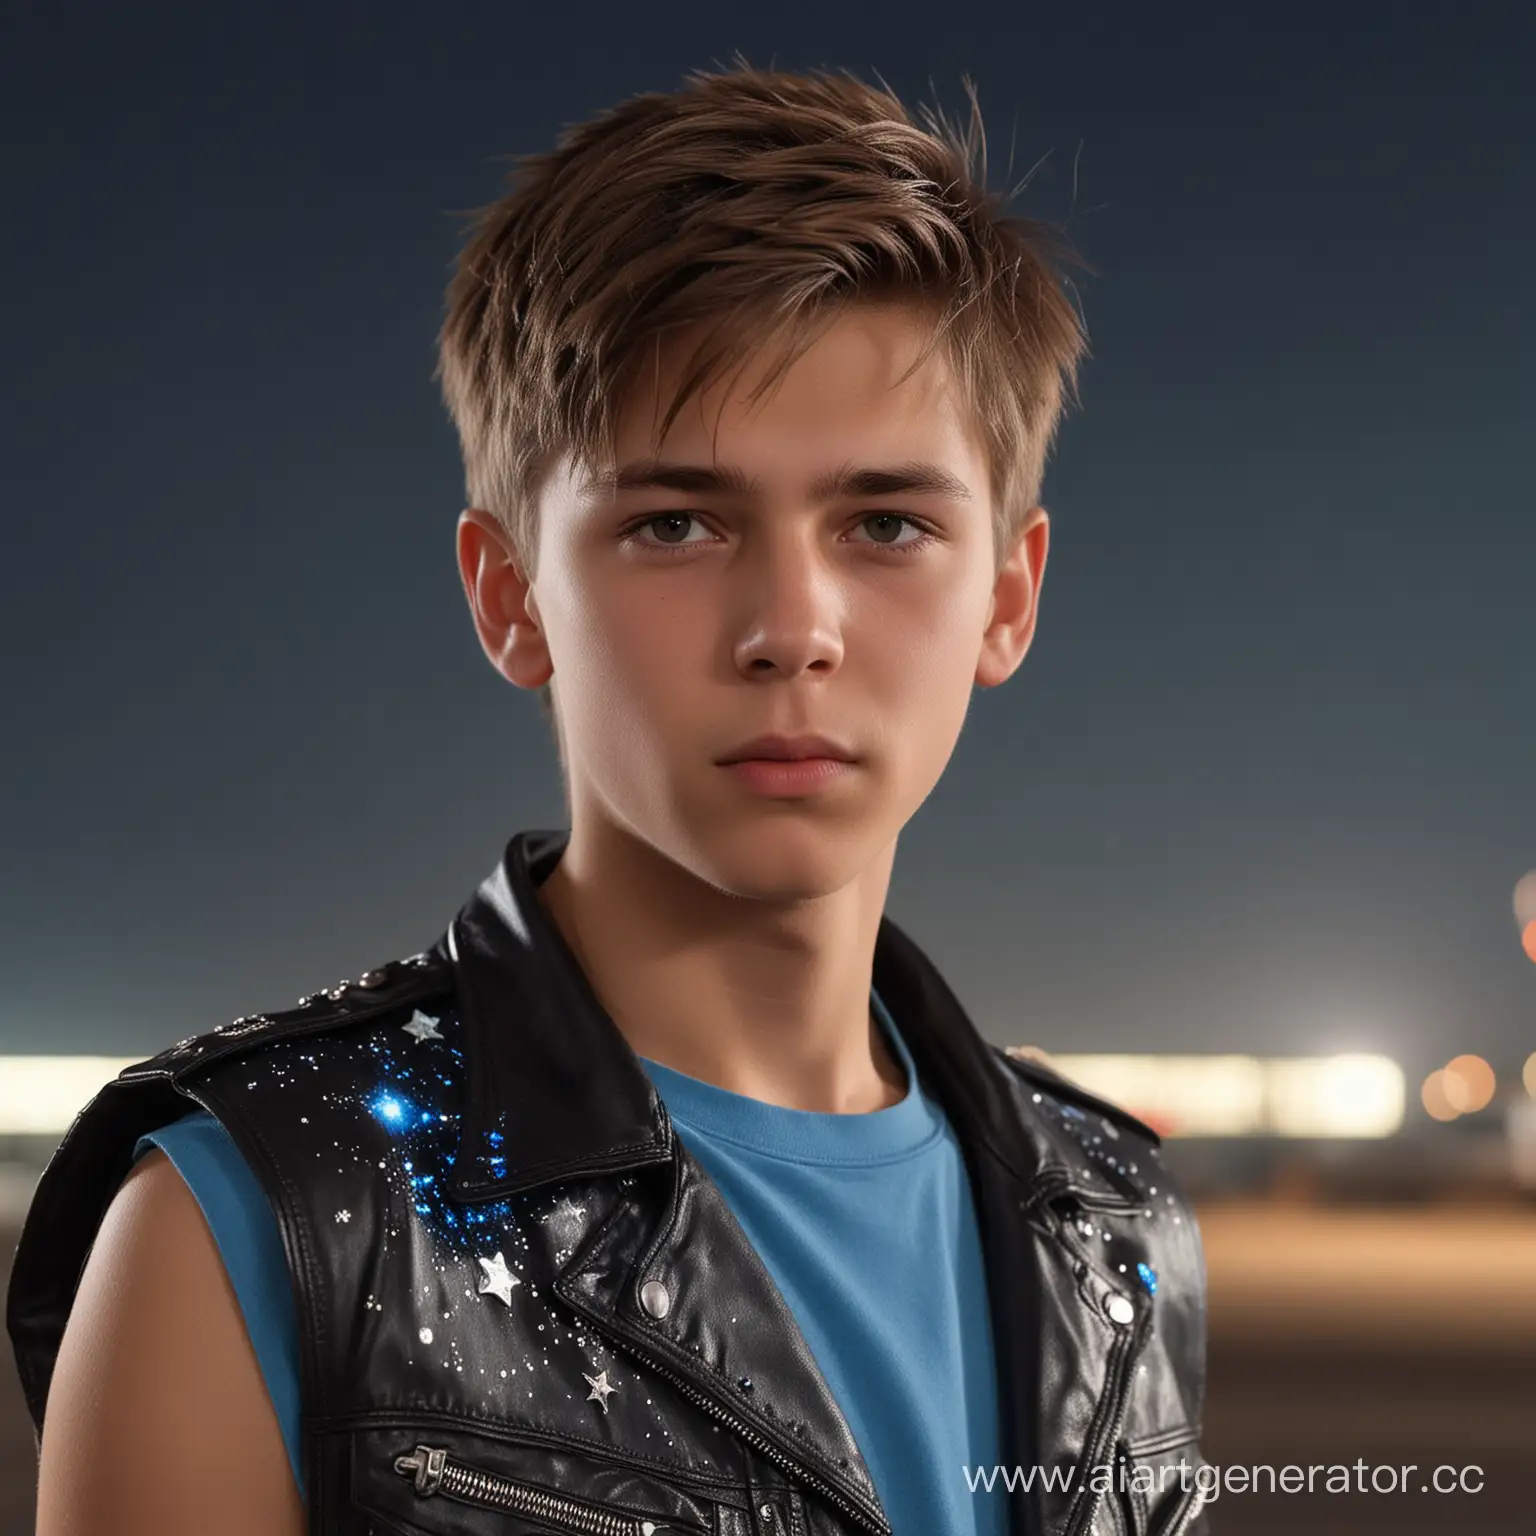 Beautiful-Russian-Teenager-in-Leather-Jacket-Gazing-at-Night-Sky-with-Stars